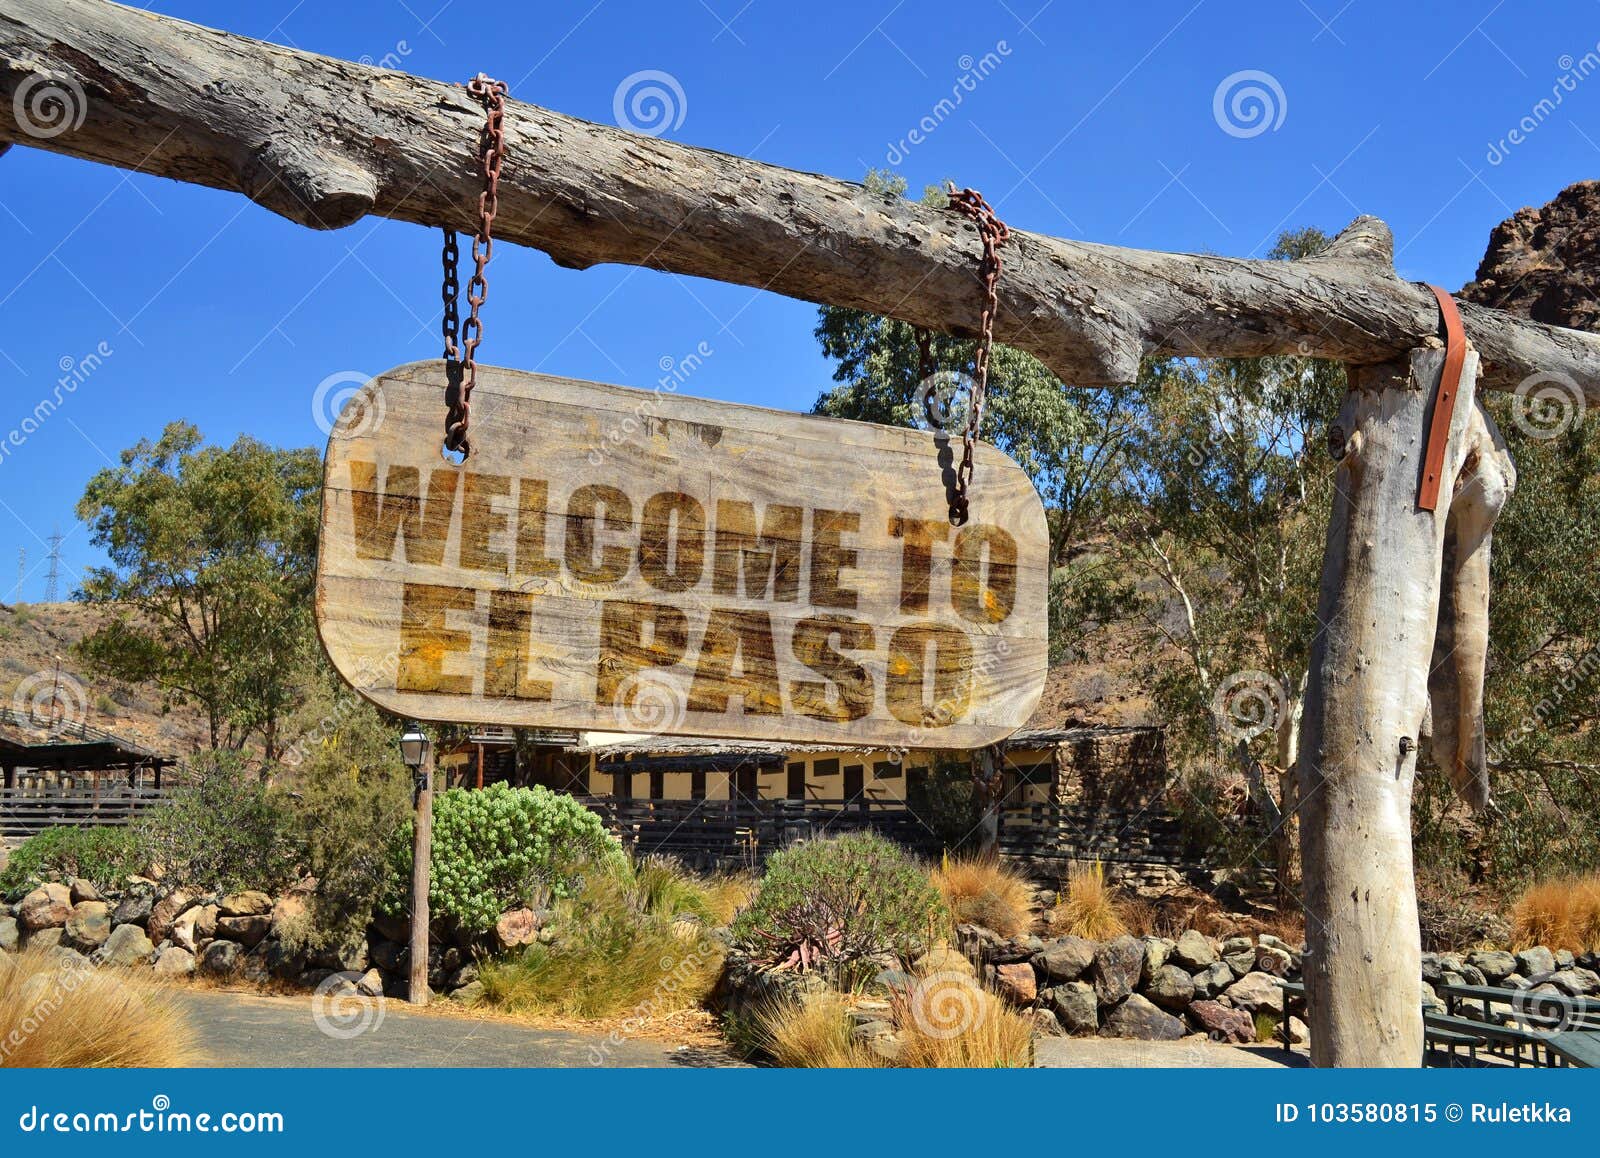 old wood signboard with text welcome to el paso. hanging on a branch